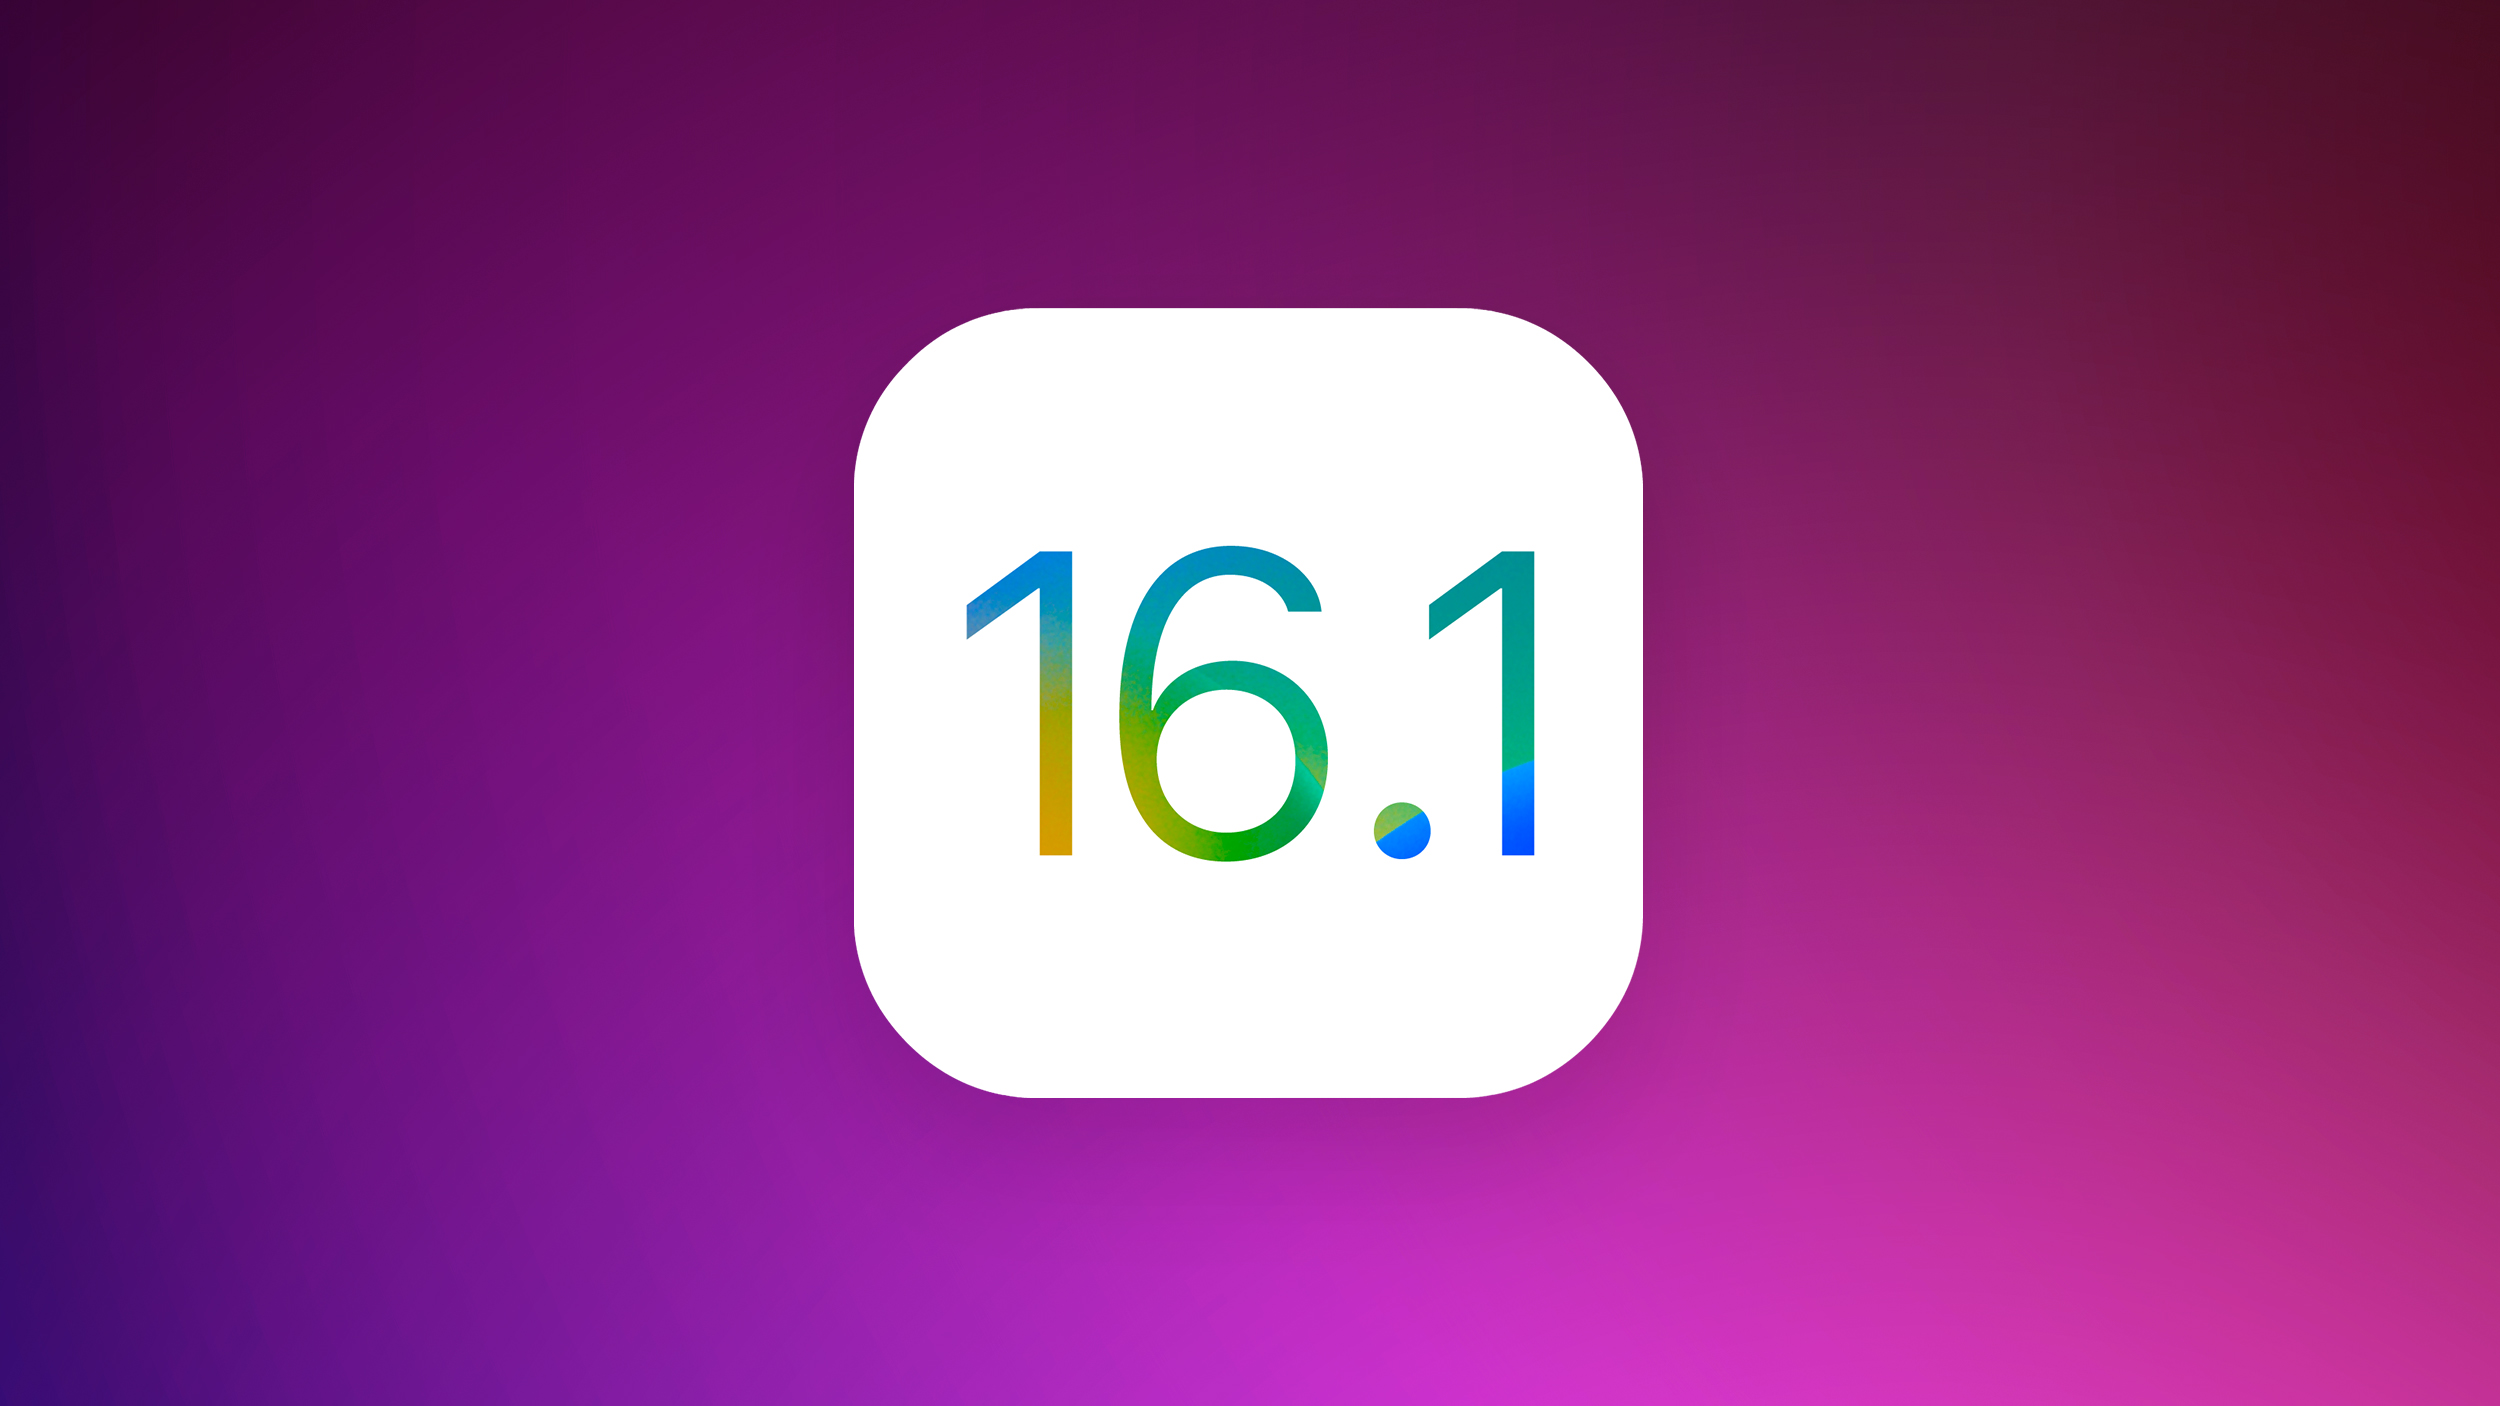 Apple Releases First Public Beta of iOS 16.1 With Clean Energy Charging, Live Activities and More